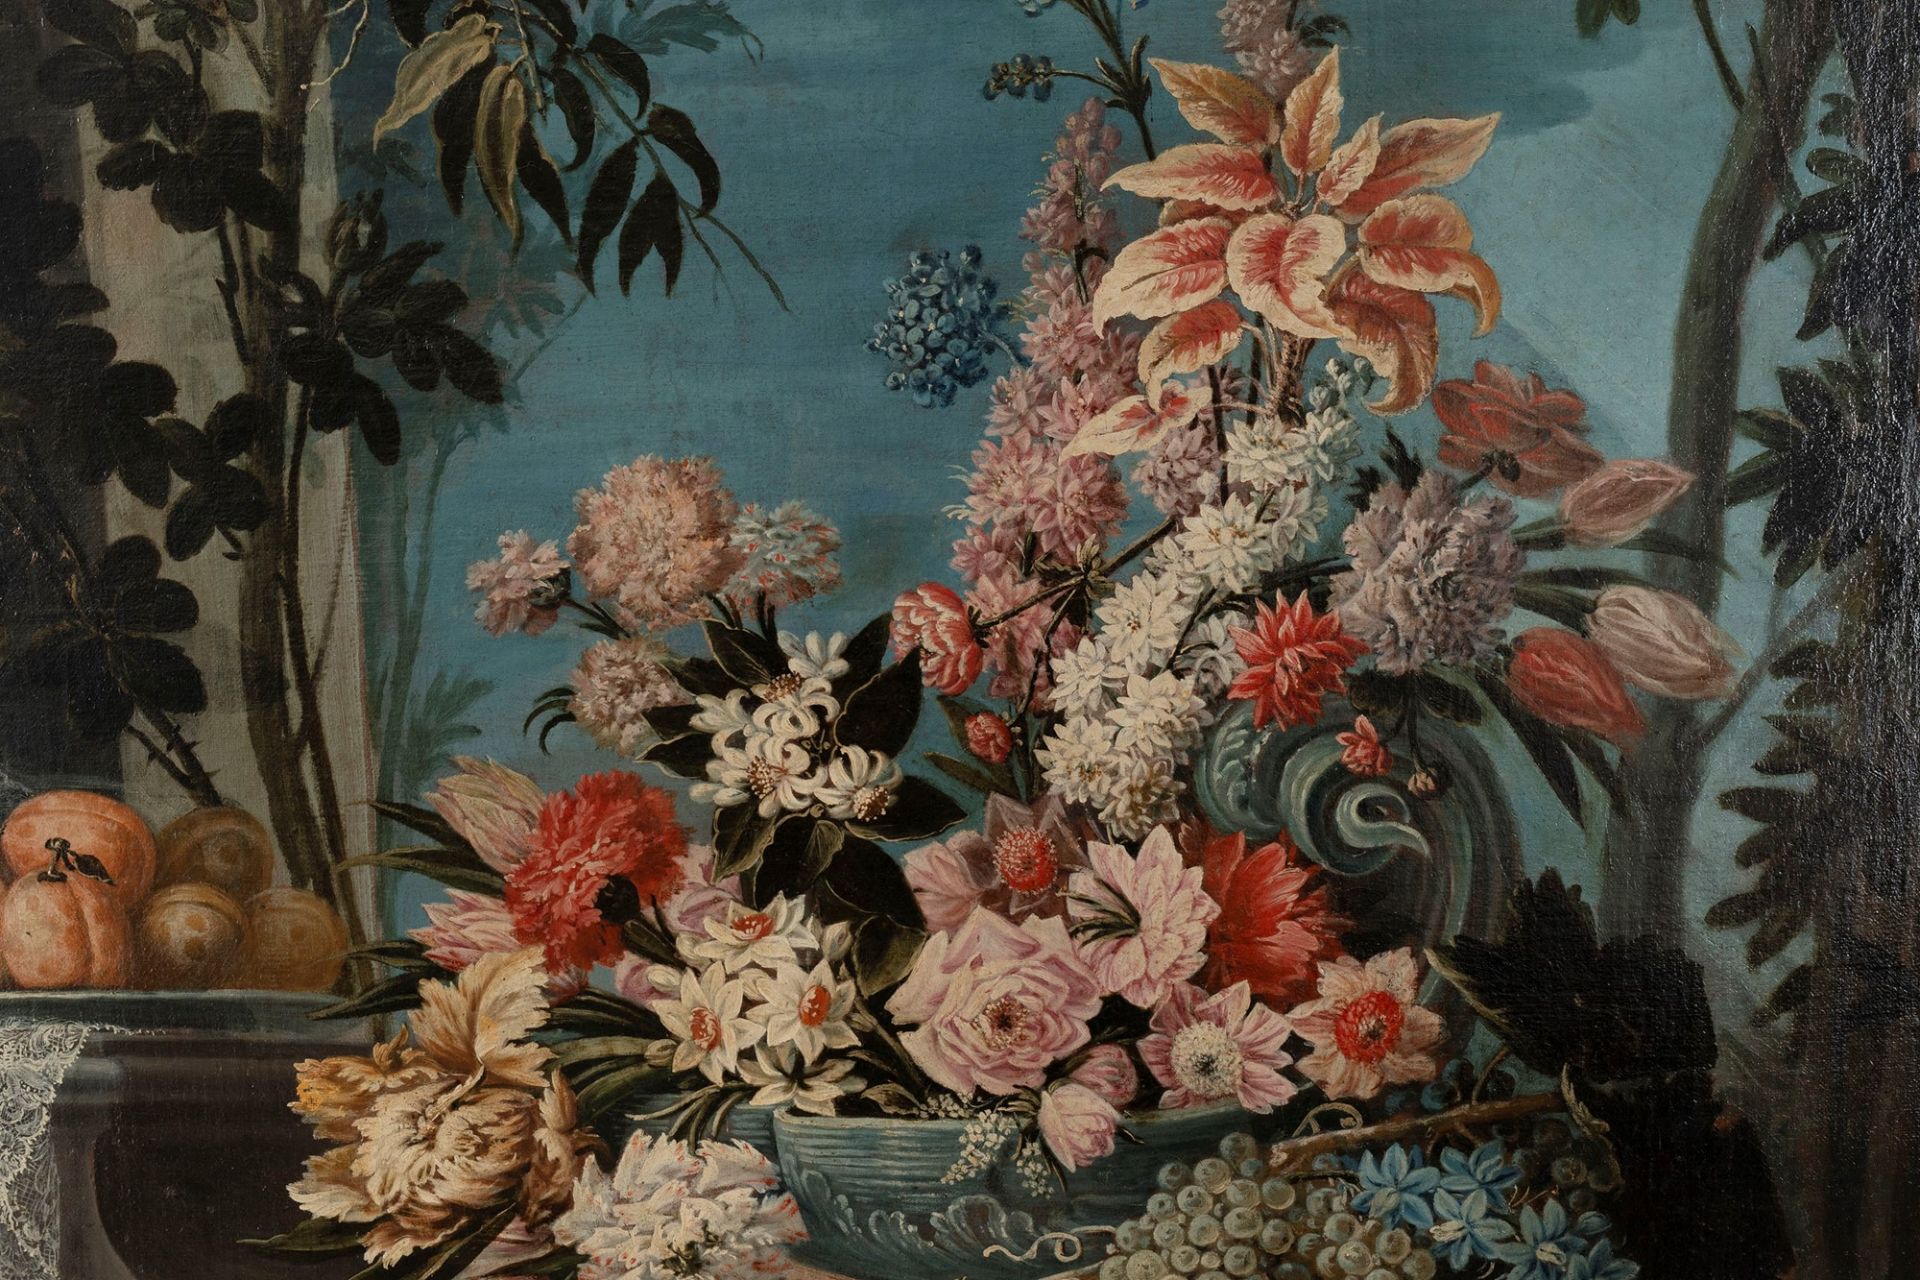 Lombard School, XVIII century - Flowers and fruit in an Italian garden with bunnies and parrots - Image 8 of 8